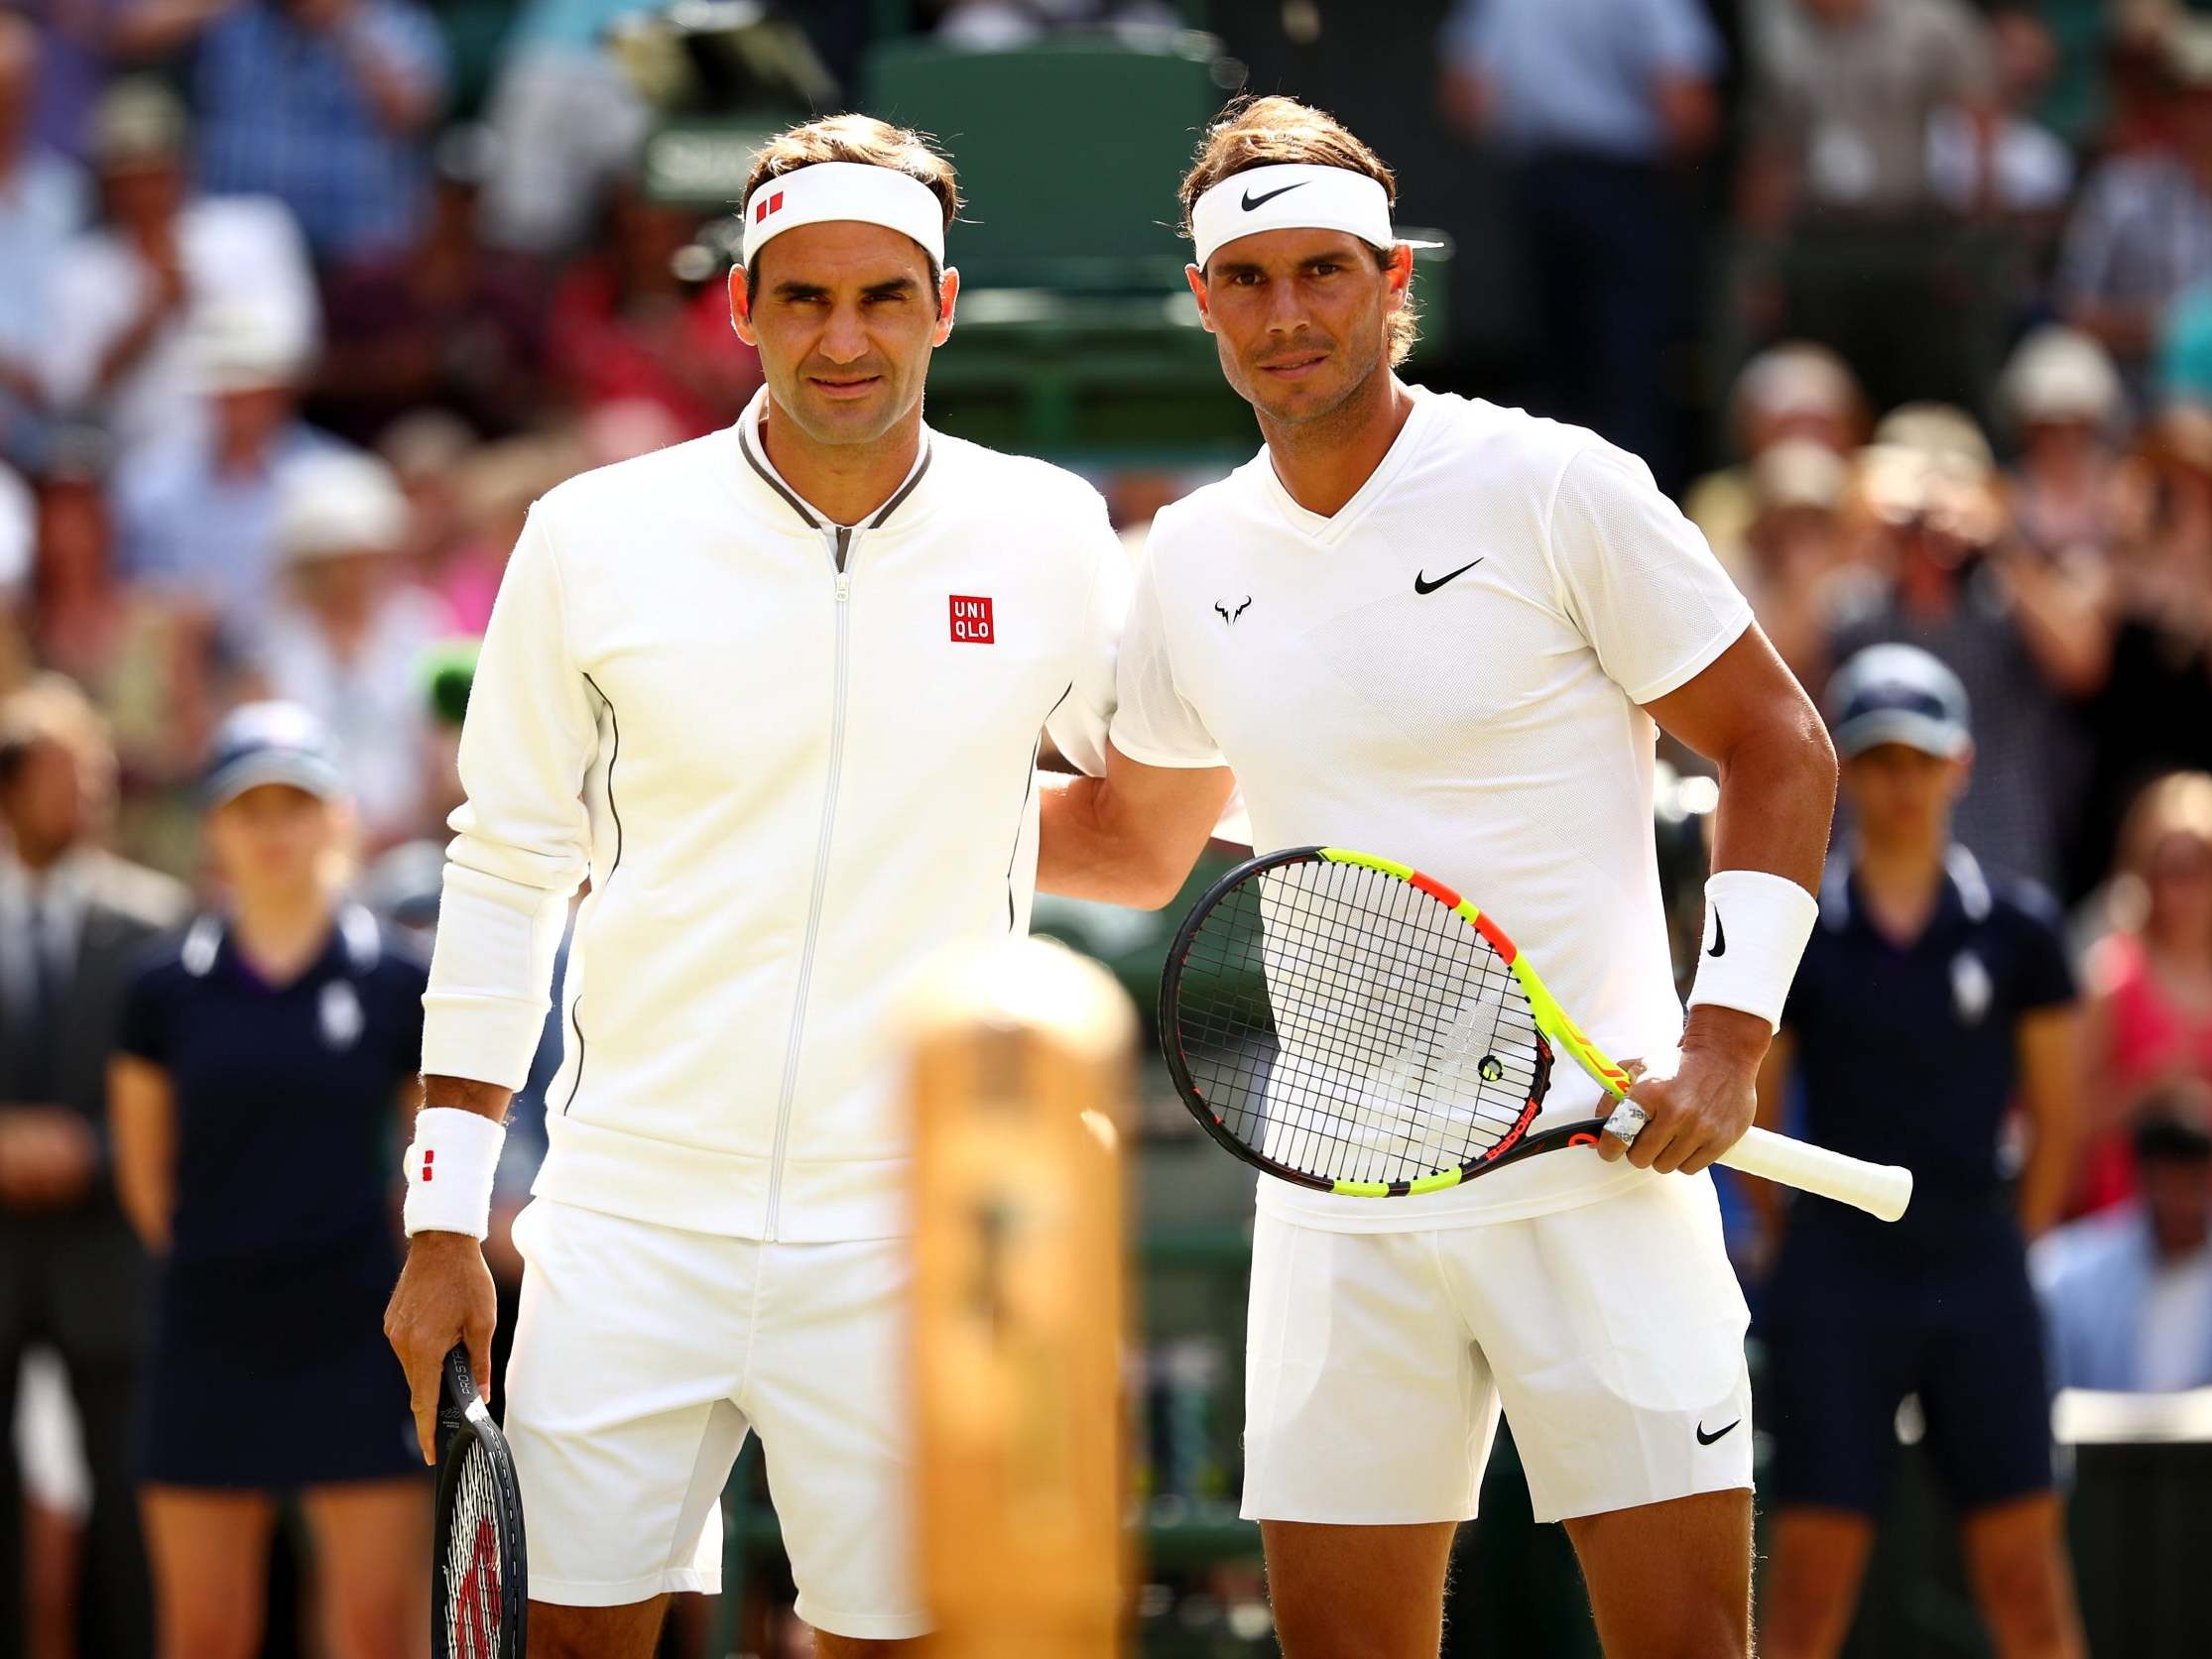 Wimbledon 2019 LIVE: Federer vs Nadal latest, plus scores and results